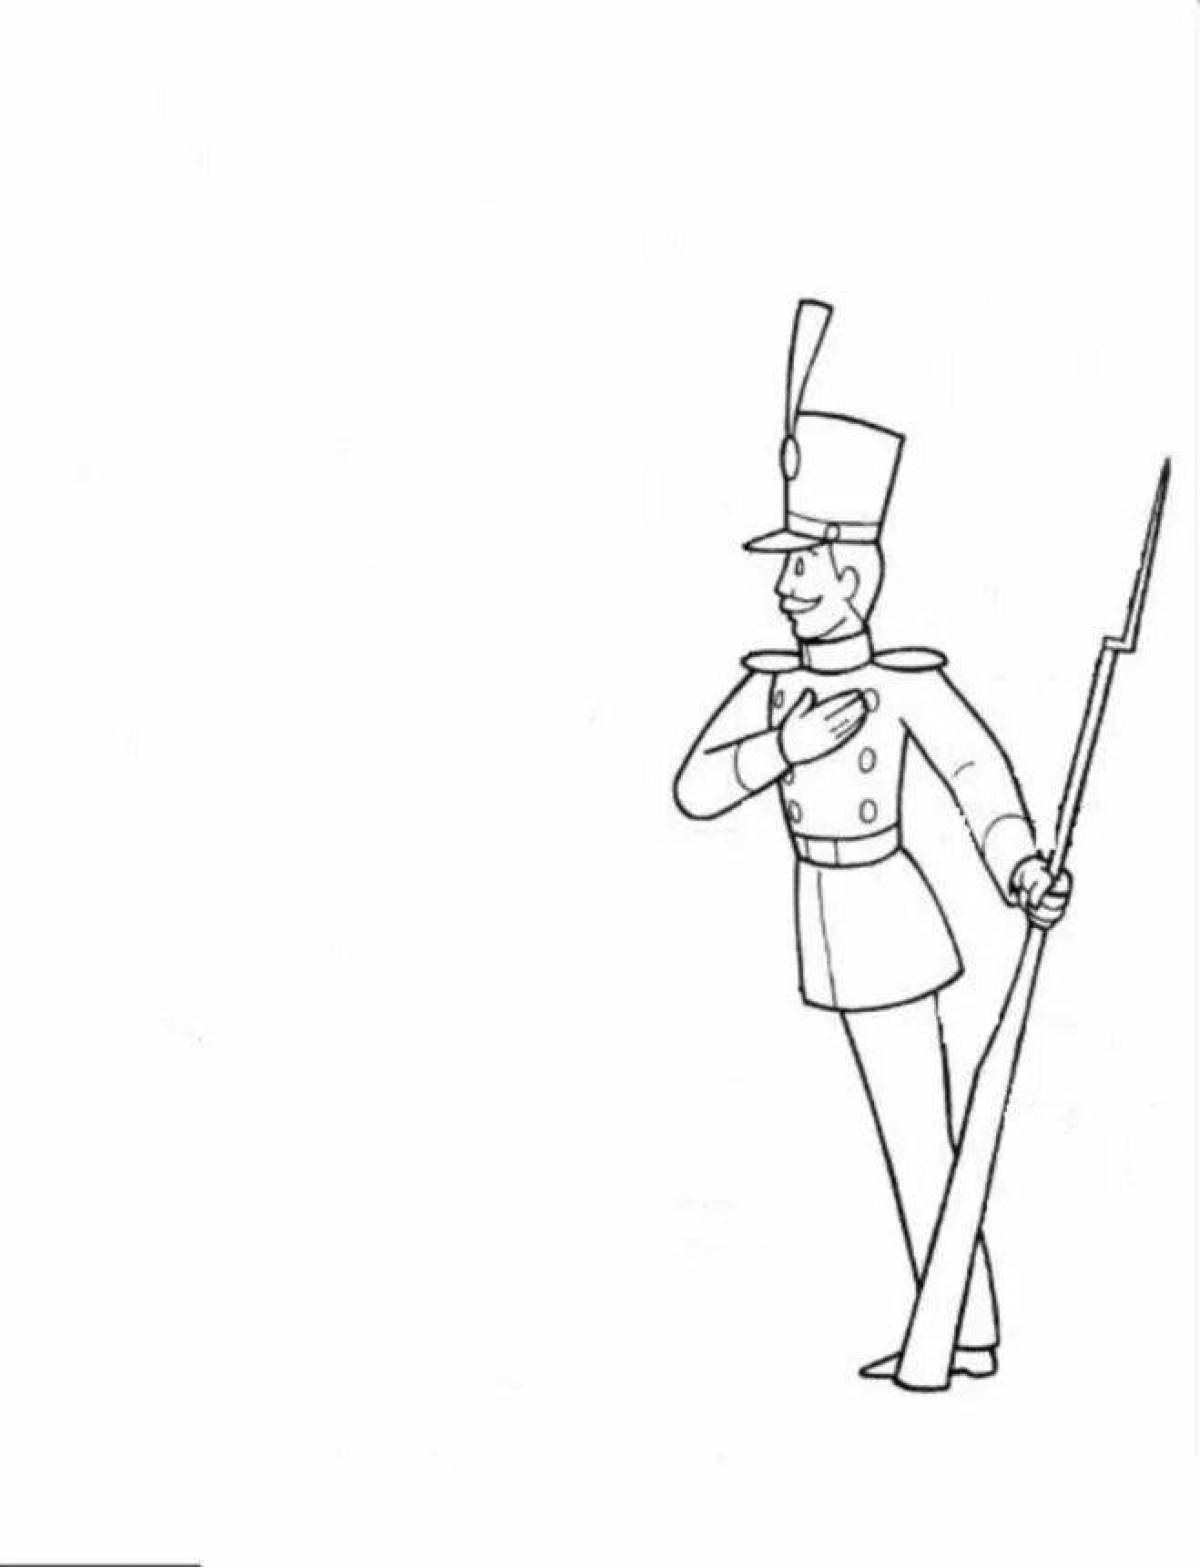 Dazzling Steadfast Tin Soldier coloring page